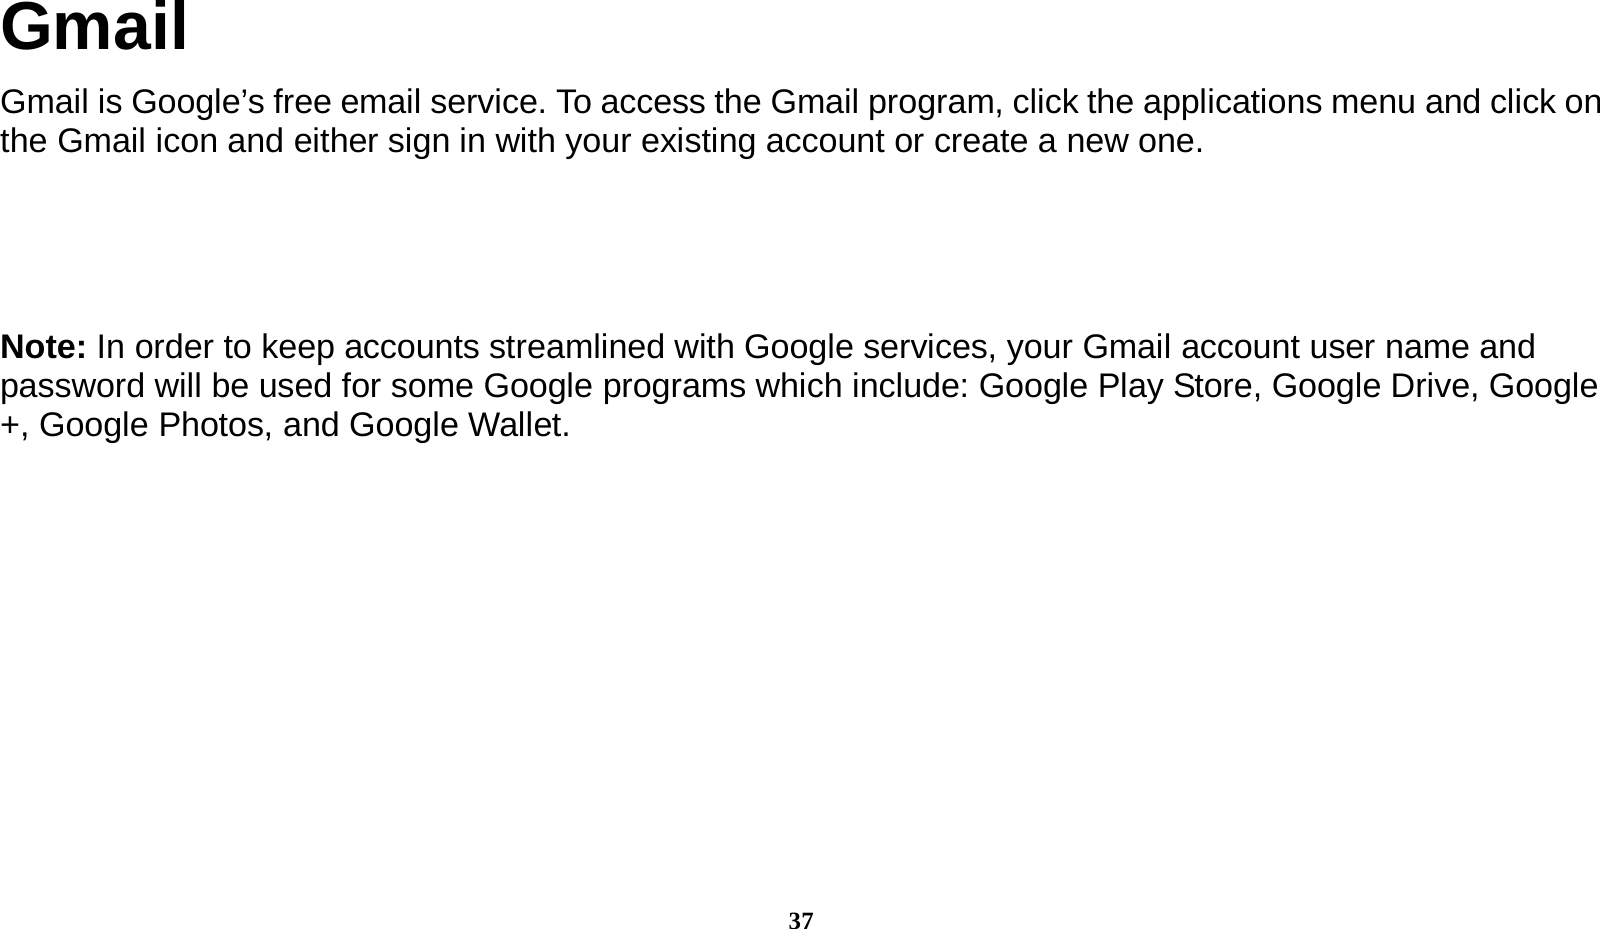  37 Gmail Gmail is Google’s free email service. To access the Gmail program, click the applications menu and click on the Gmail icon and either sign in with your existing account or create a new one.      Note: In order to keep accounts streamlined with Google services, your Gmail account user name and password will be used for some Google programs which include: Google Play Store, Google Drive, Google +, Google Photos, and Google Wallet.   